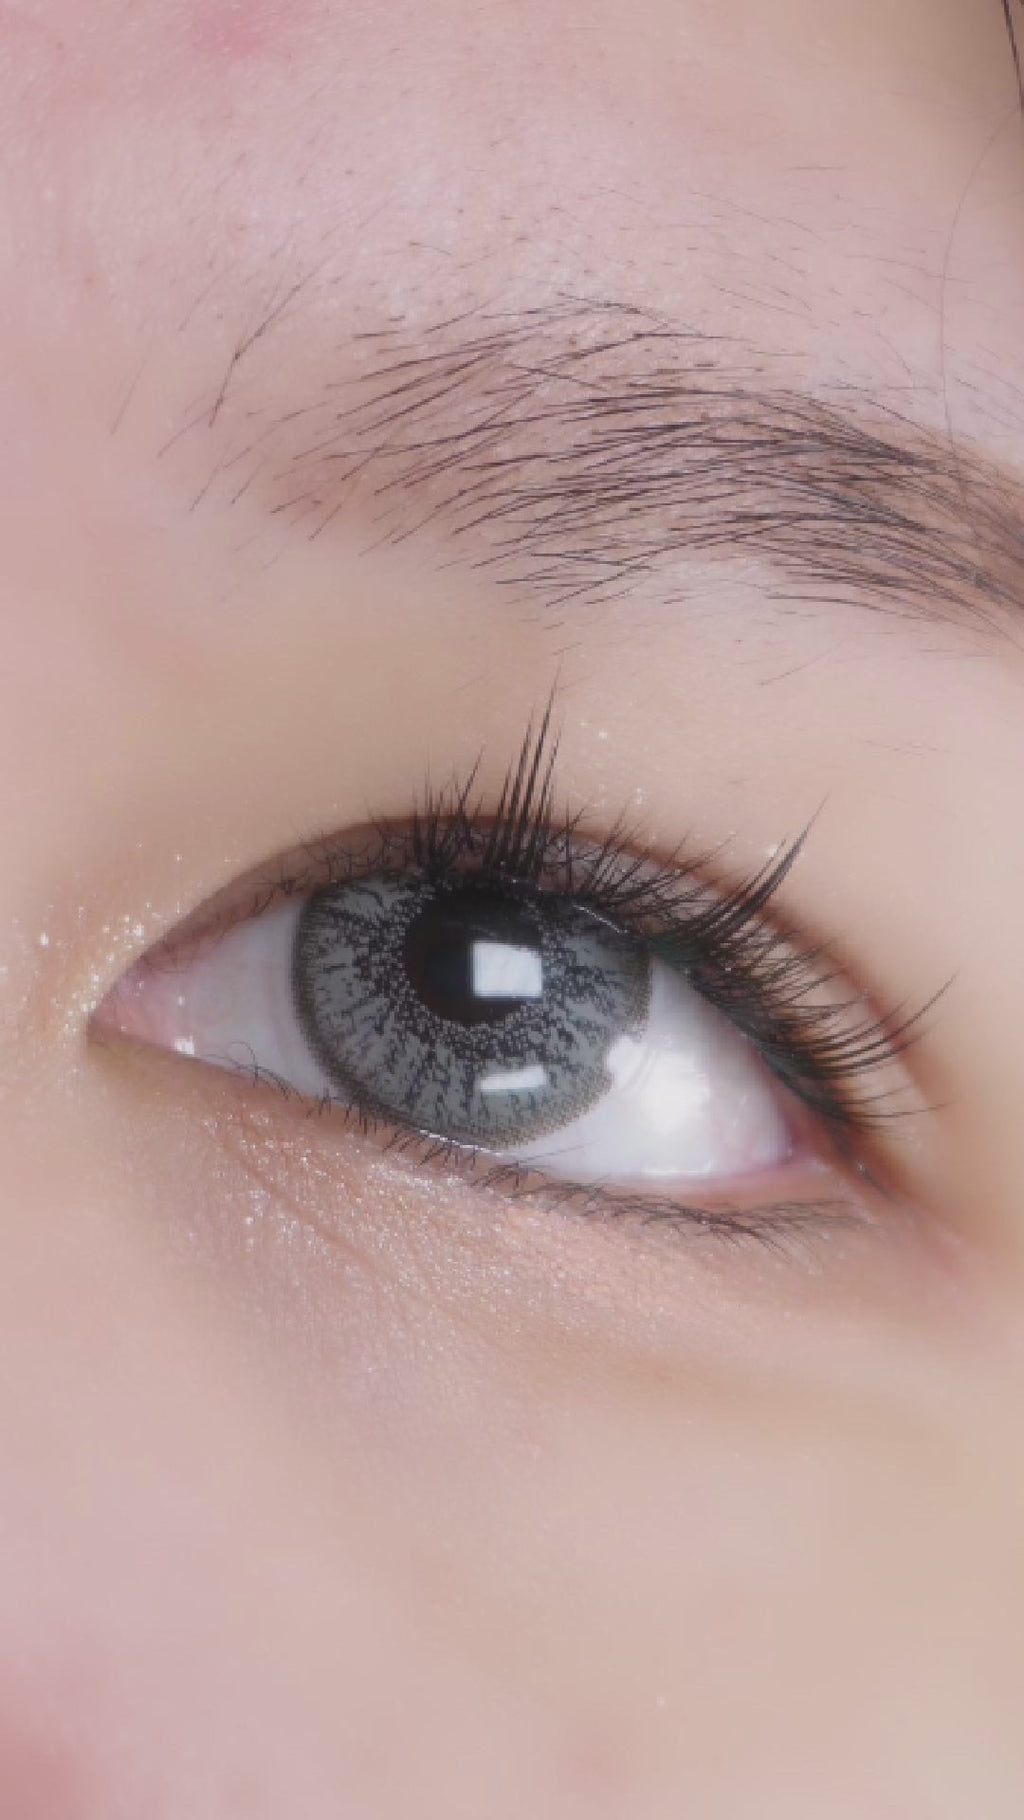 Model trying on eyelighter grey contact lenses for astigmatism, showing the transformative effect of the before/after contact lens, paired with subtle korean inspired eye makeup